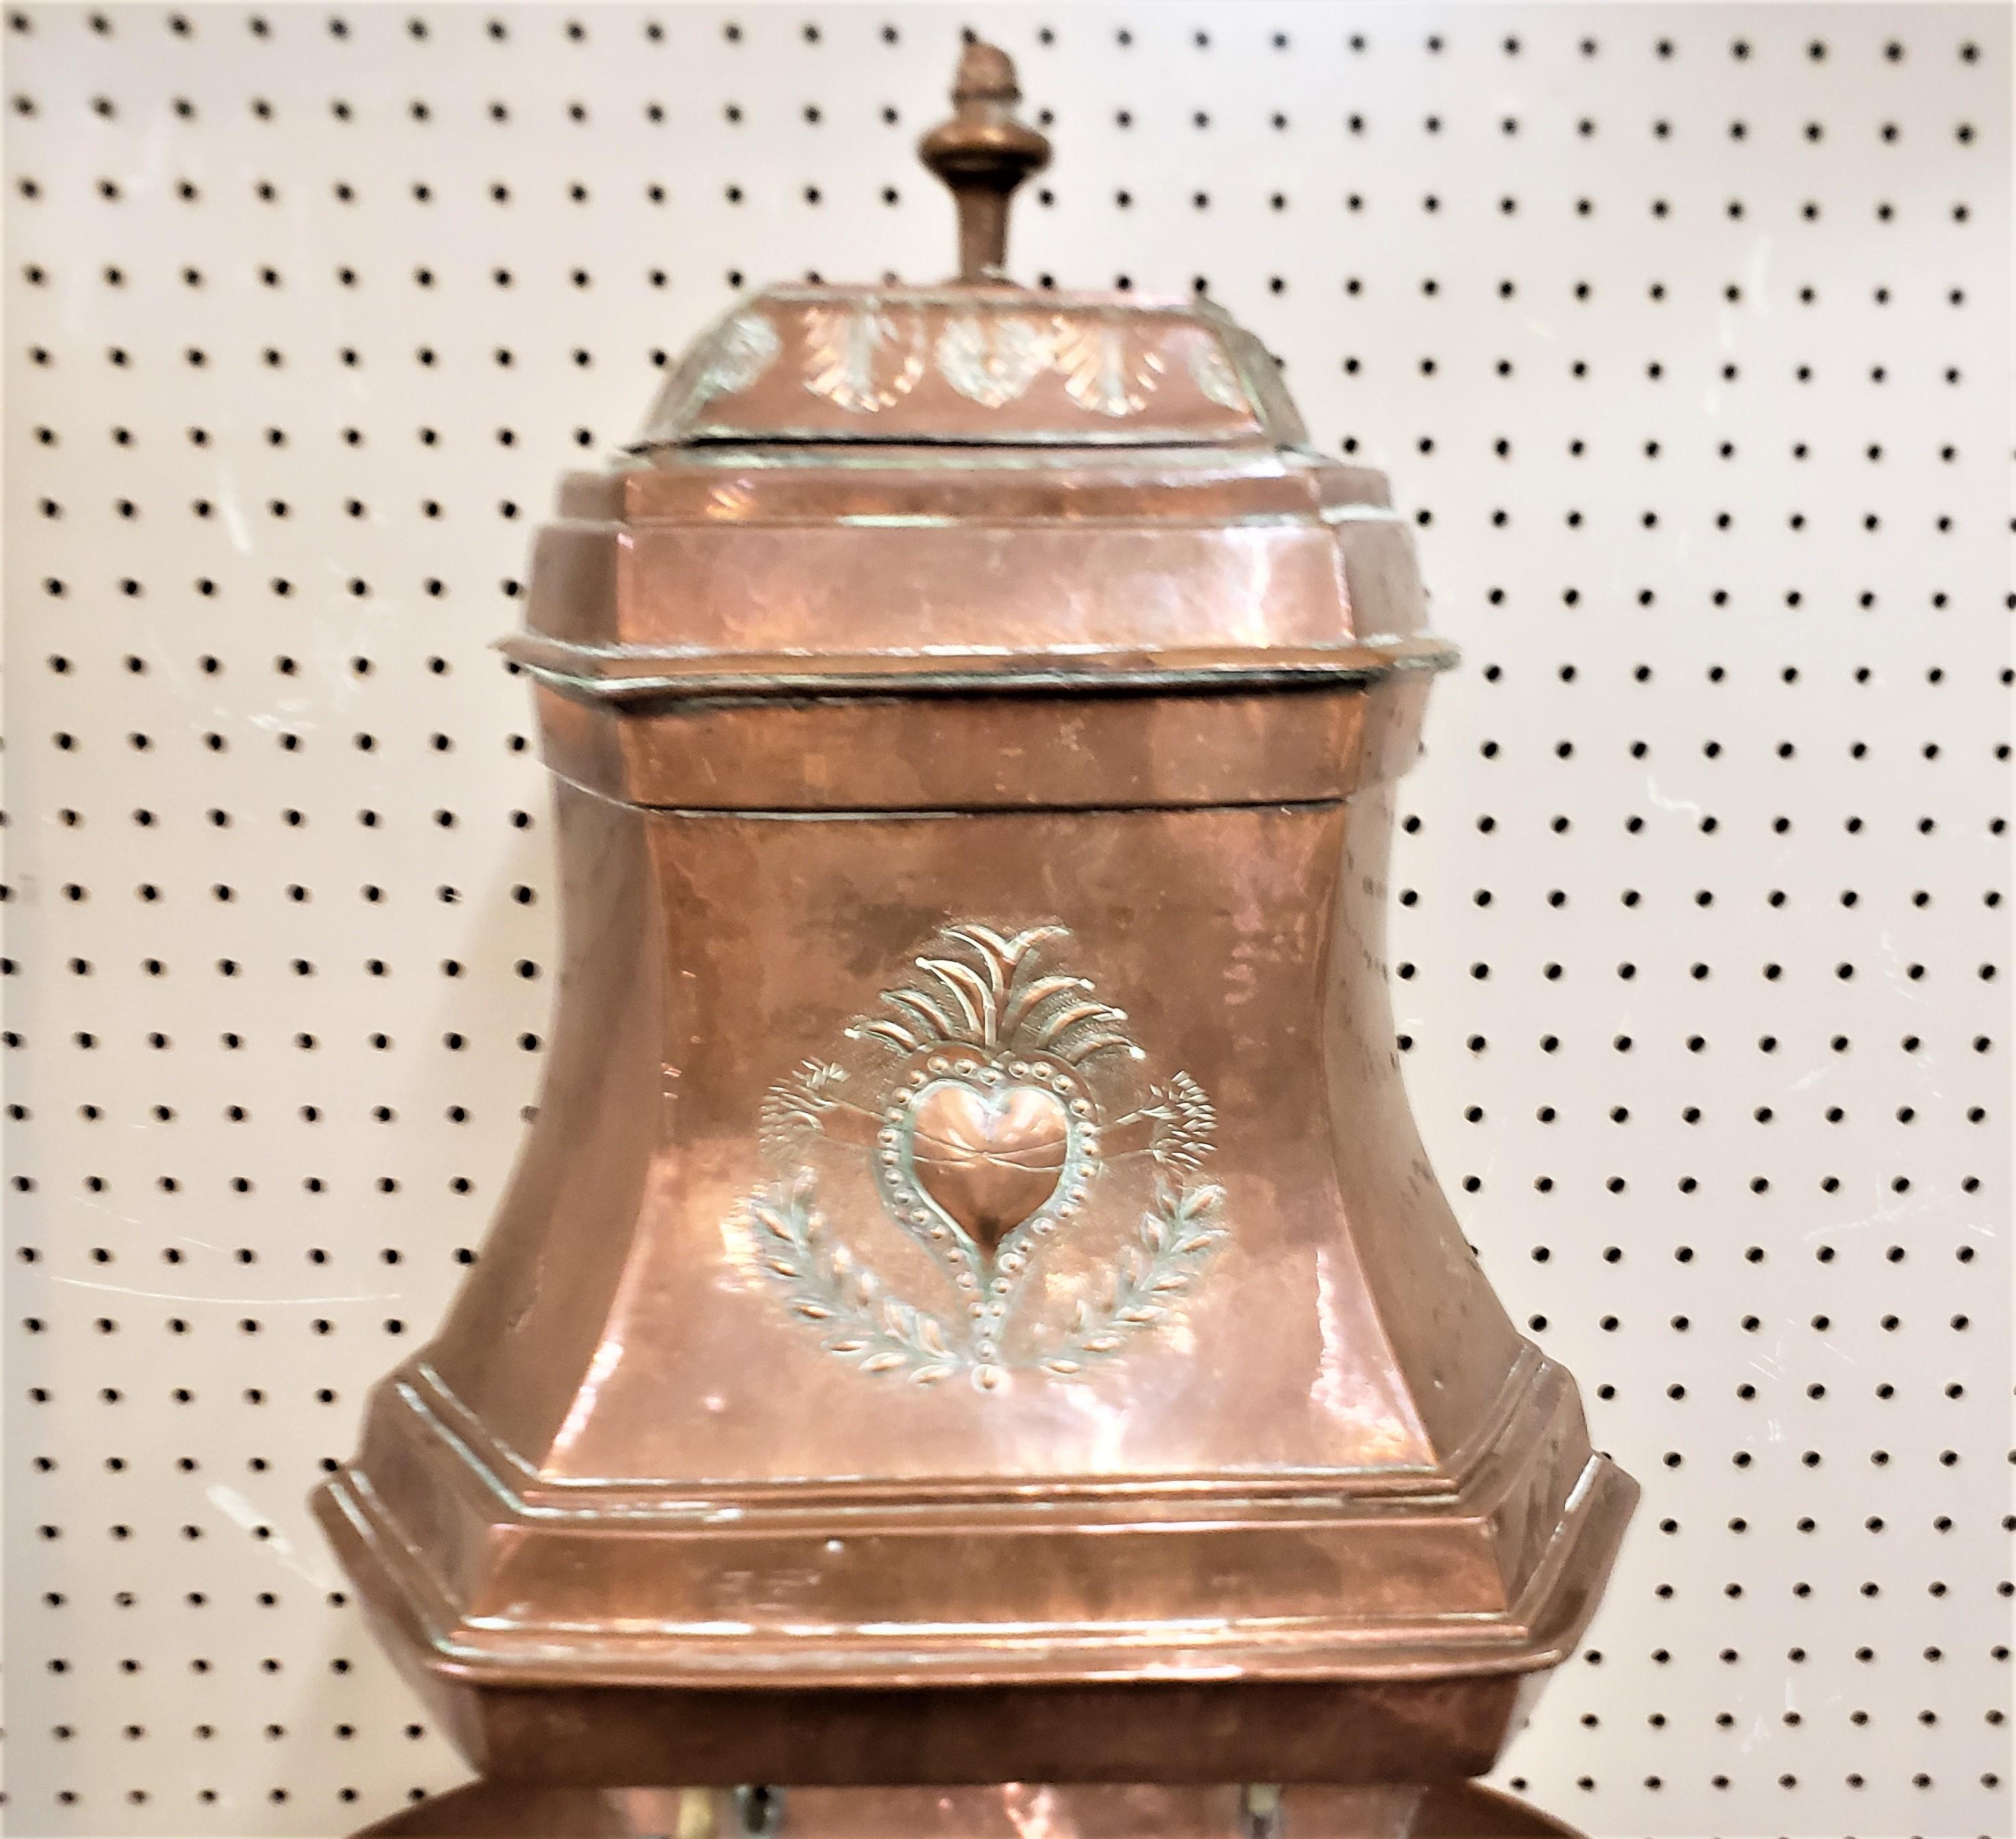 Hand-Crafted Antique French Copper Converted Cistern & Sink Planter Box or Garden Ornament For Sale